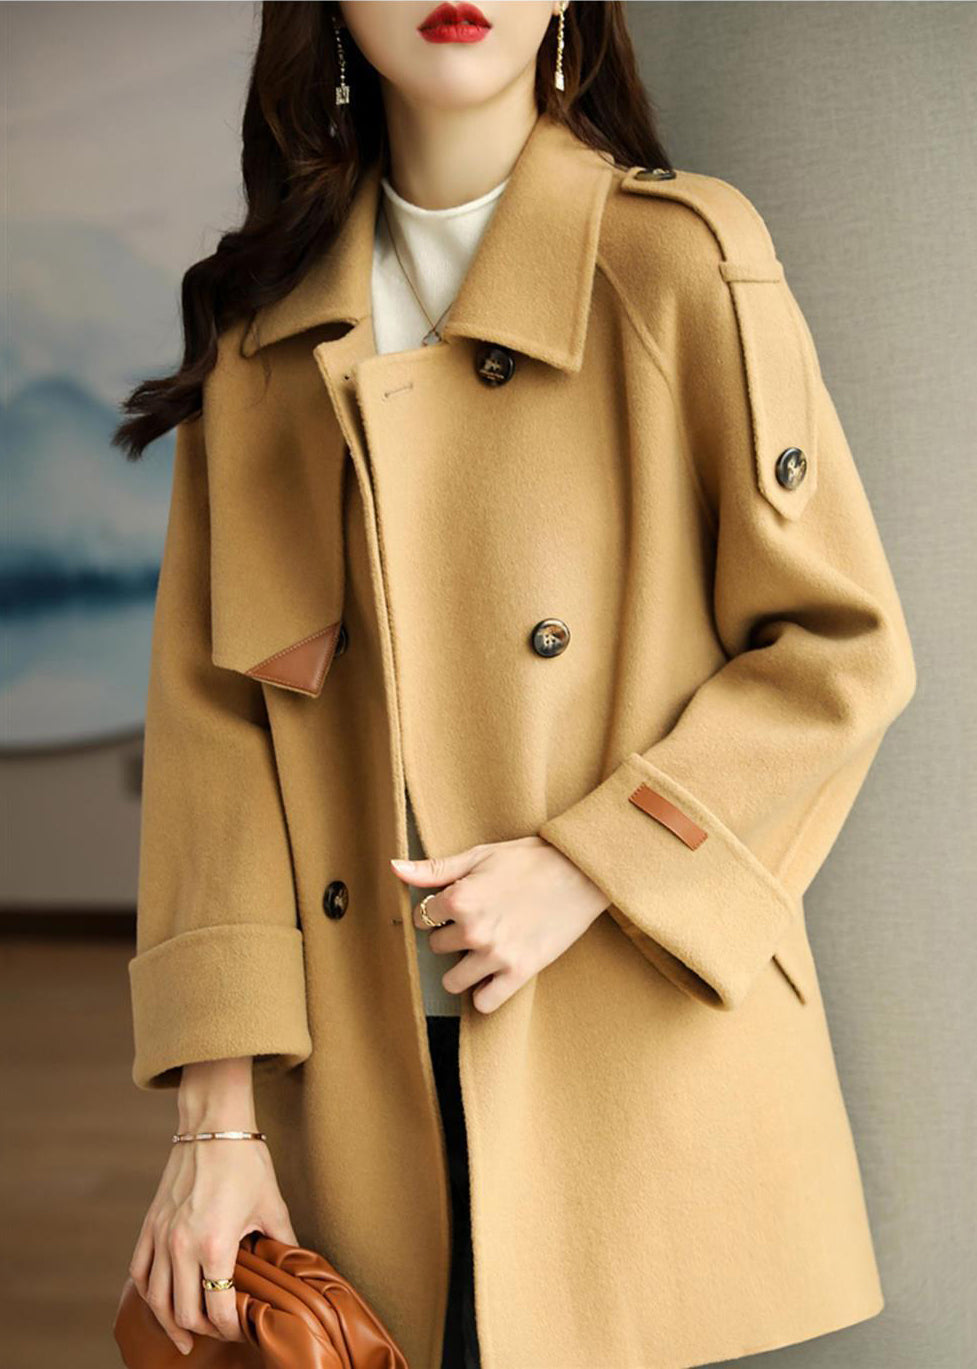 French Light Camel Peter Pan Collar Double Breast Woolen Coats Fall